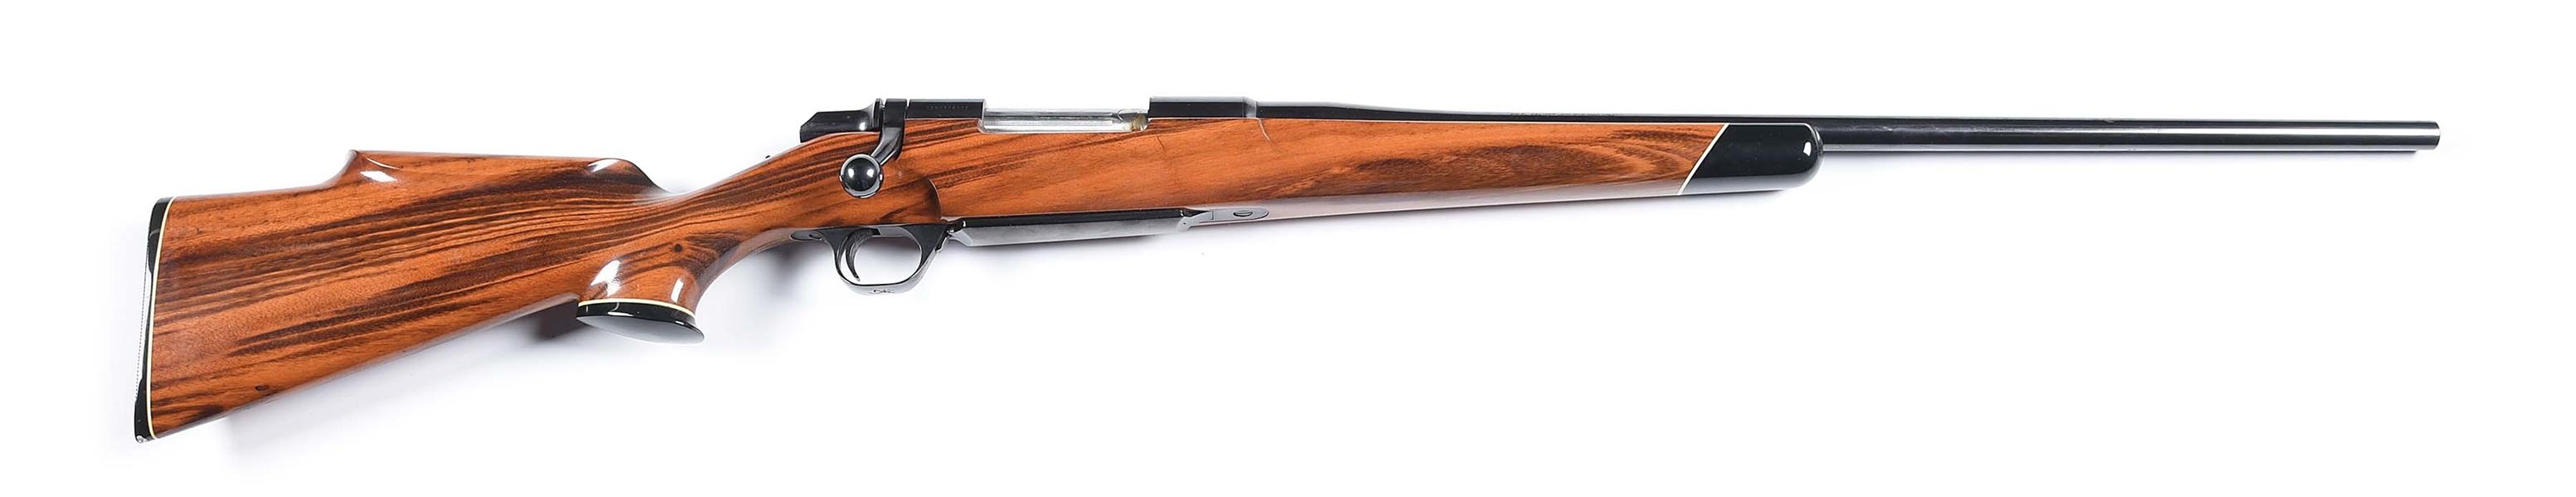 (M) BROWNING BBR BOLT ACTION RIFLE WITH GUANACASTE STOCK.